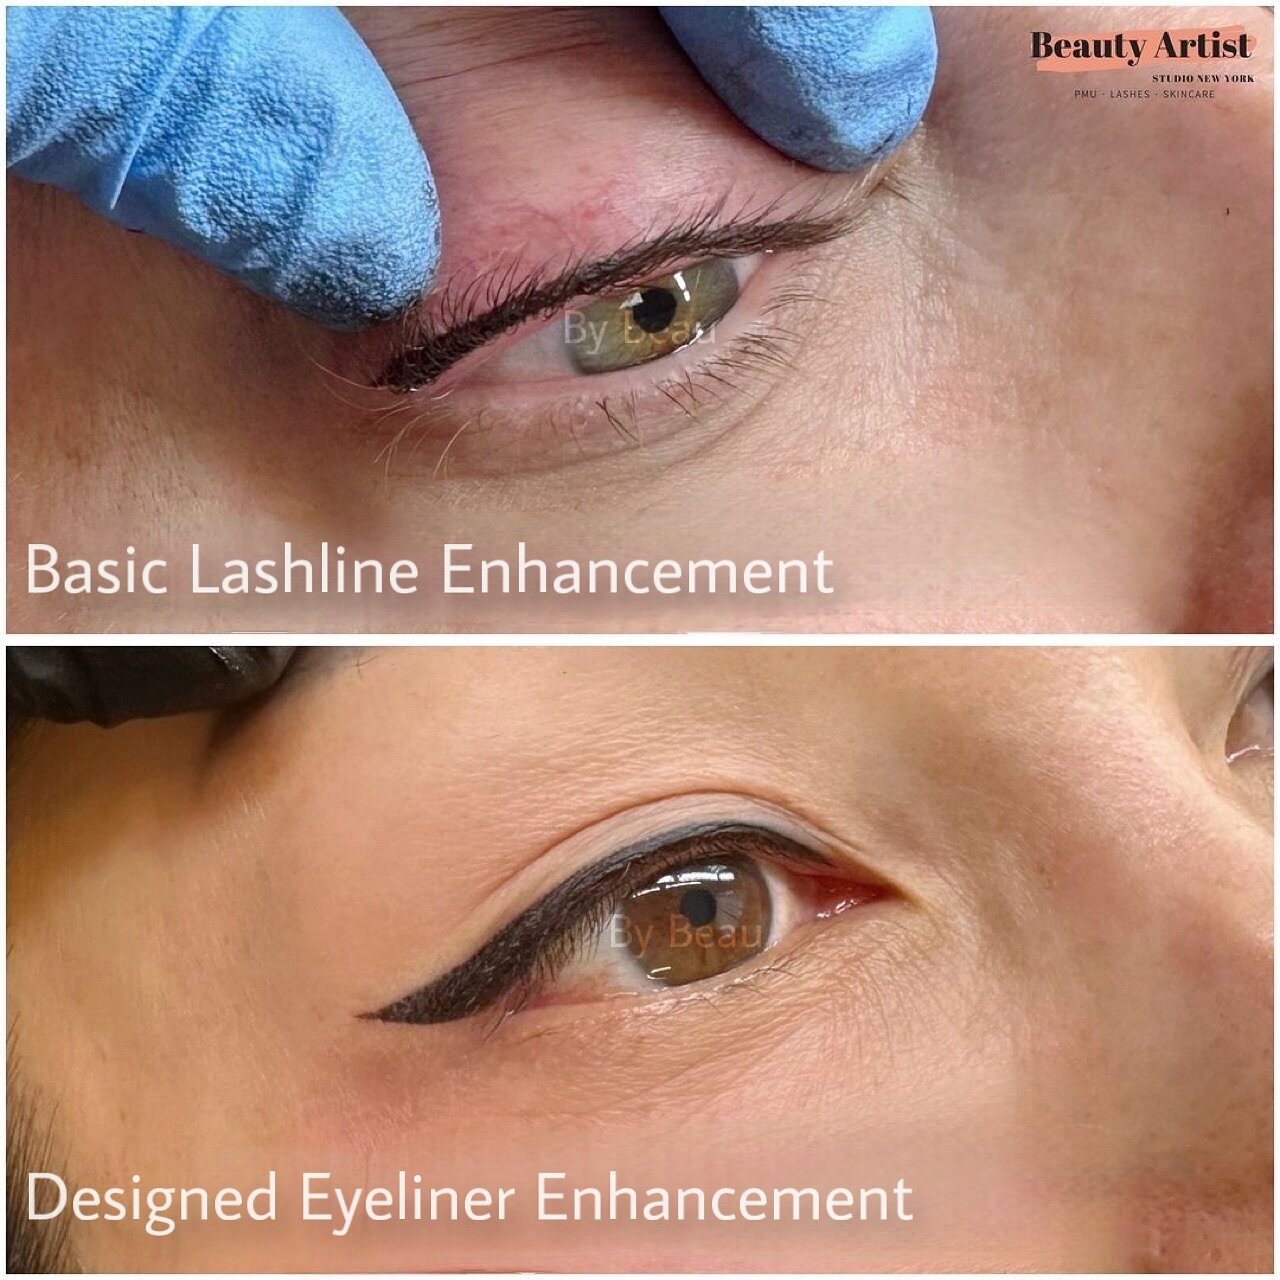 Transforming to a subtle lashline enhancement or a bold and striking eyeliner design - the power of eyeliner is truly incredible! 💫 

Which look is your favorite? 
#LashlineEnhancement vs. #EyelinerEnhancement 

➡️ Performed Artist @beau.beautyartis